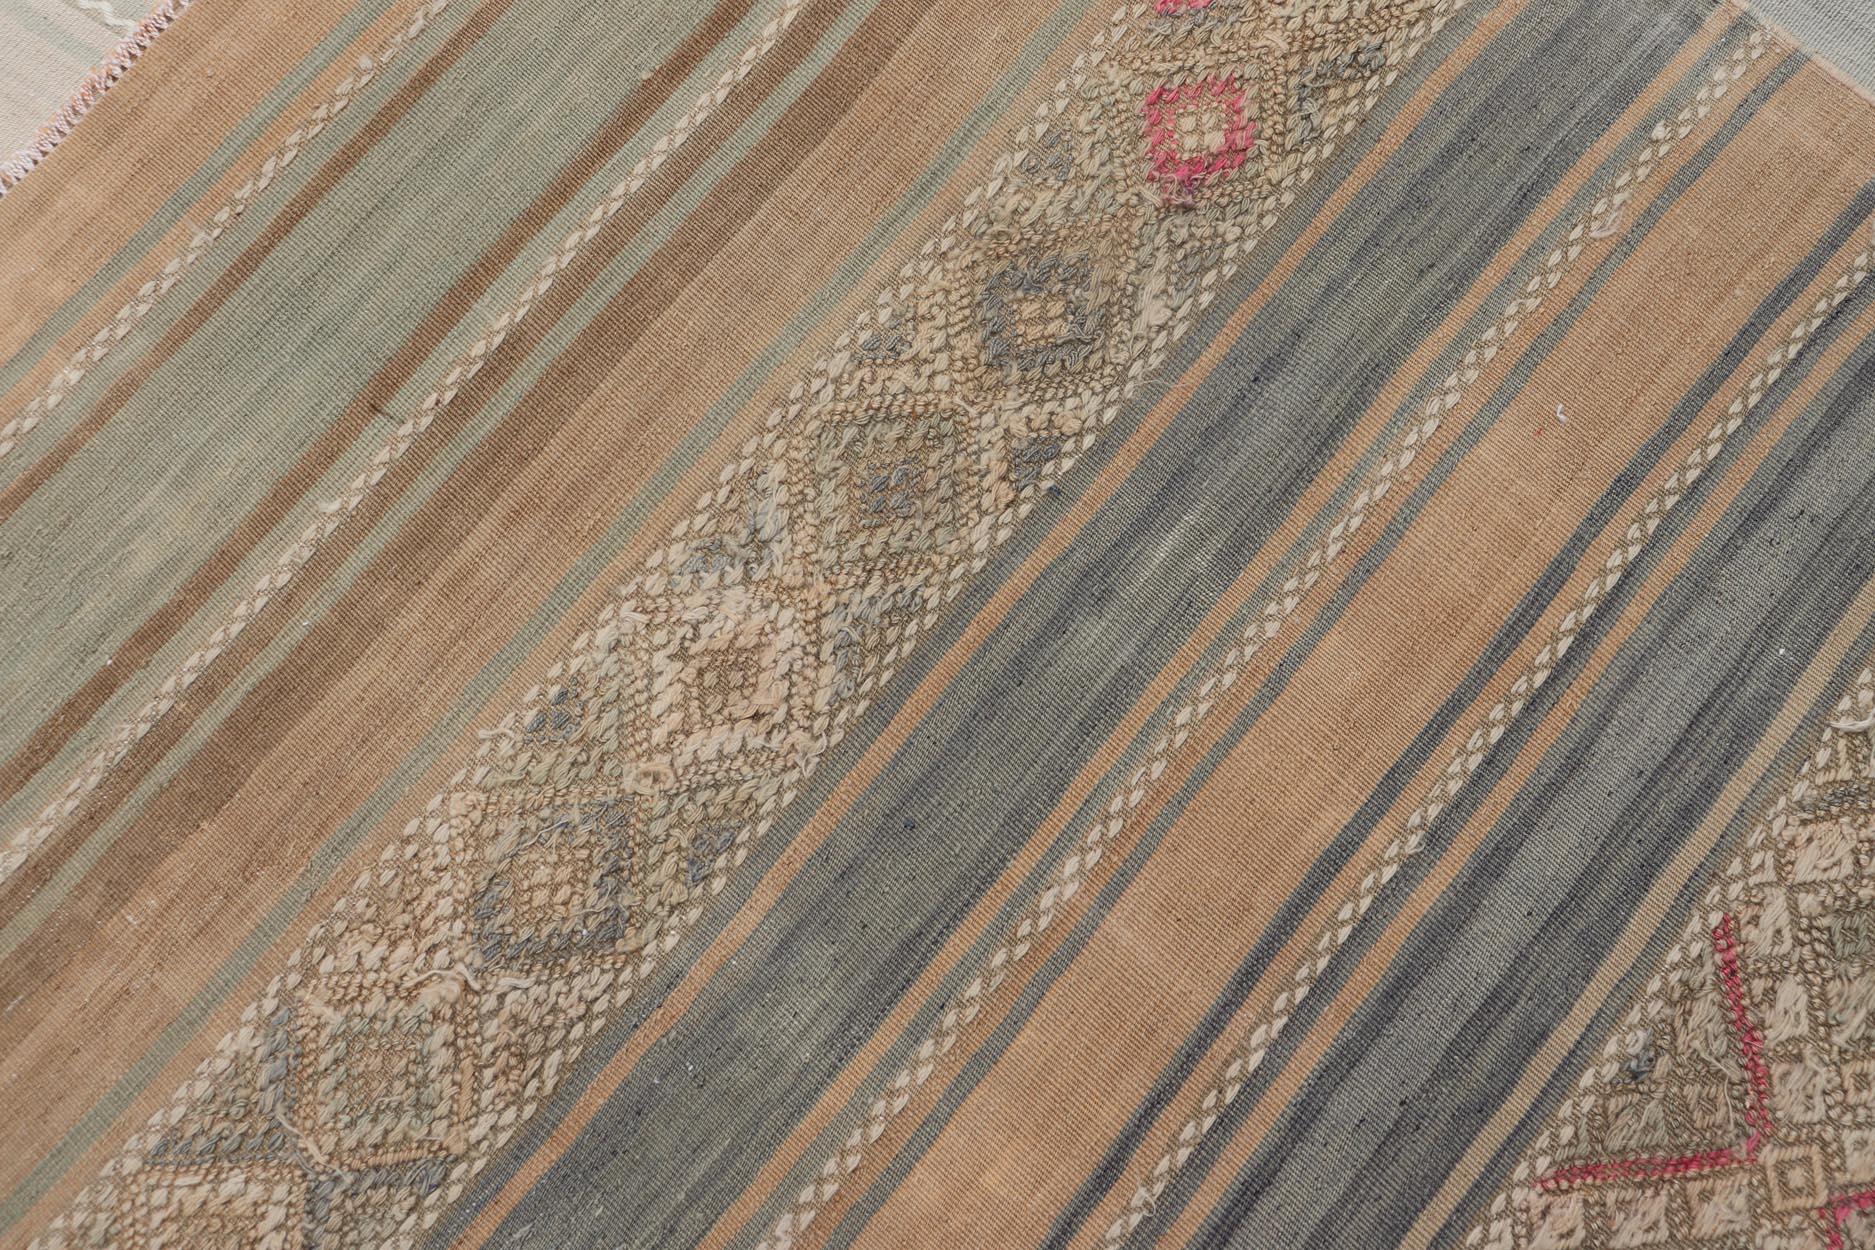 Gallery Vintage Turkish Flat-Weave Kilim with Embroideries in Earthy Tones 6